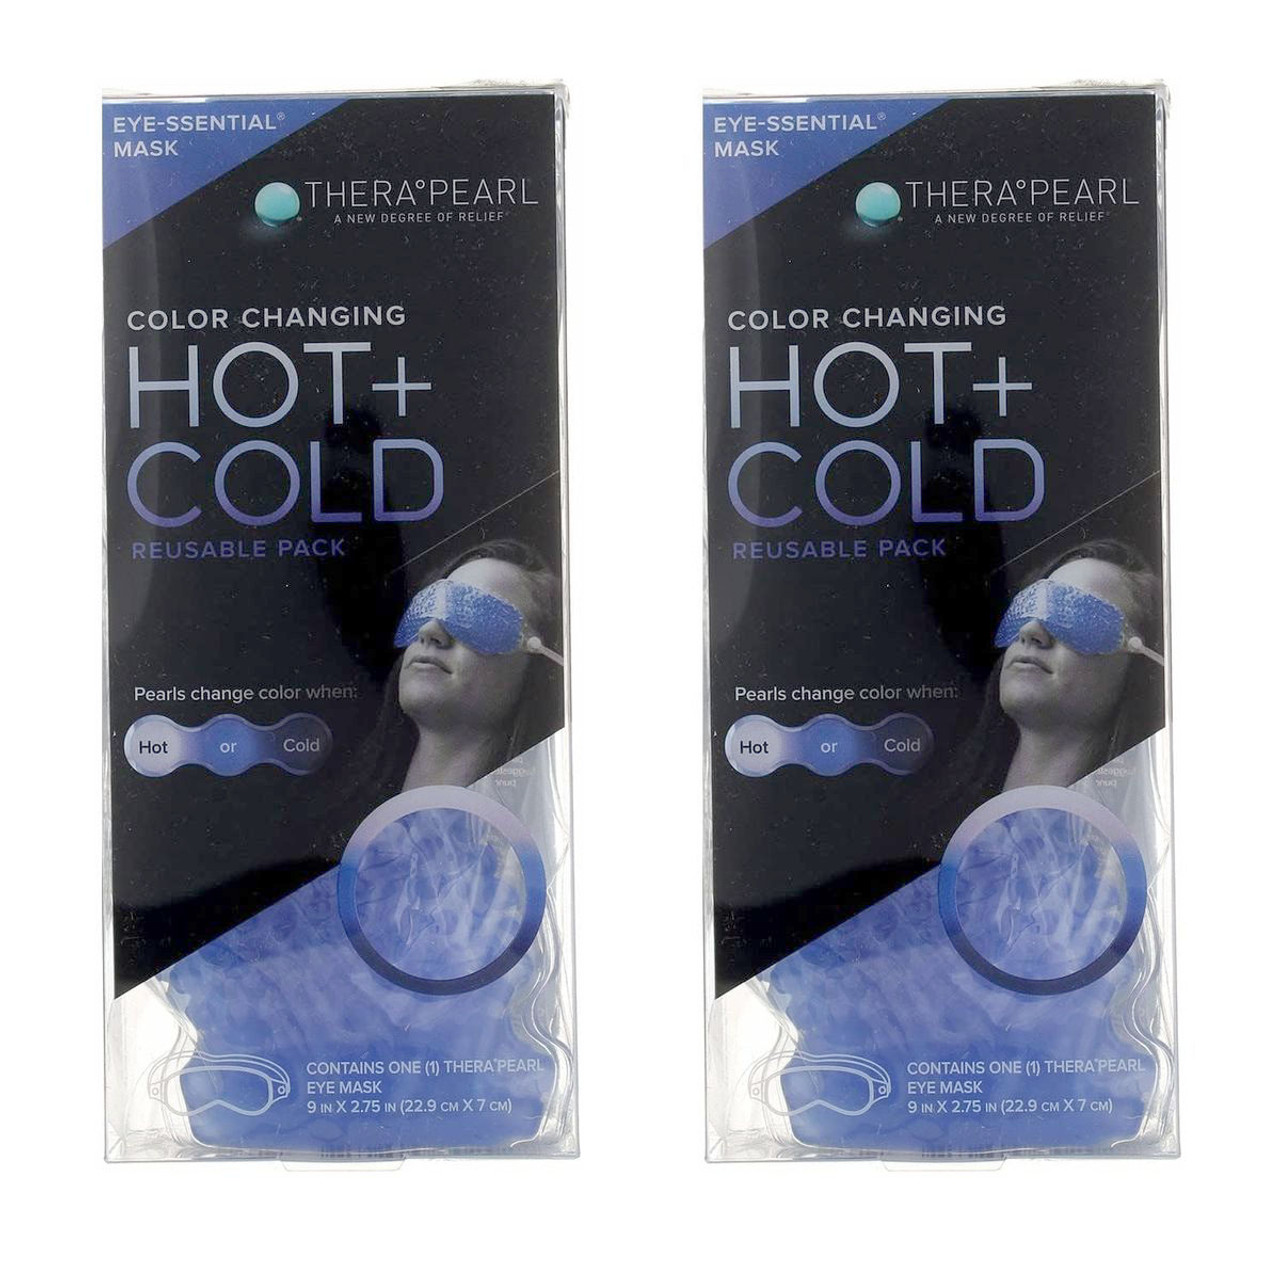 TheraPearl Reusable Hot and Cold Eye Mask (2-Pack) product image